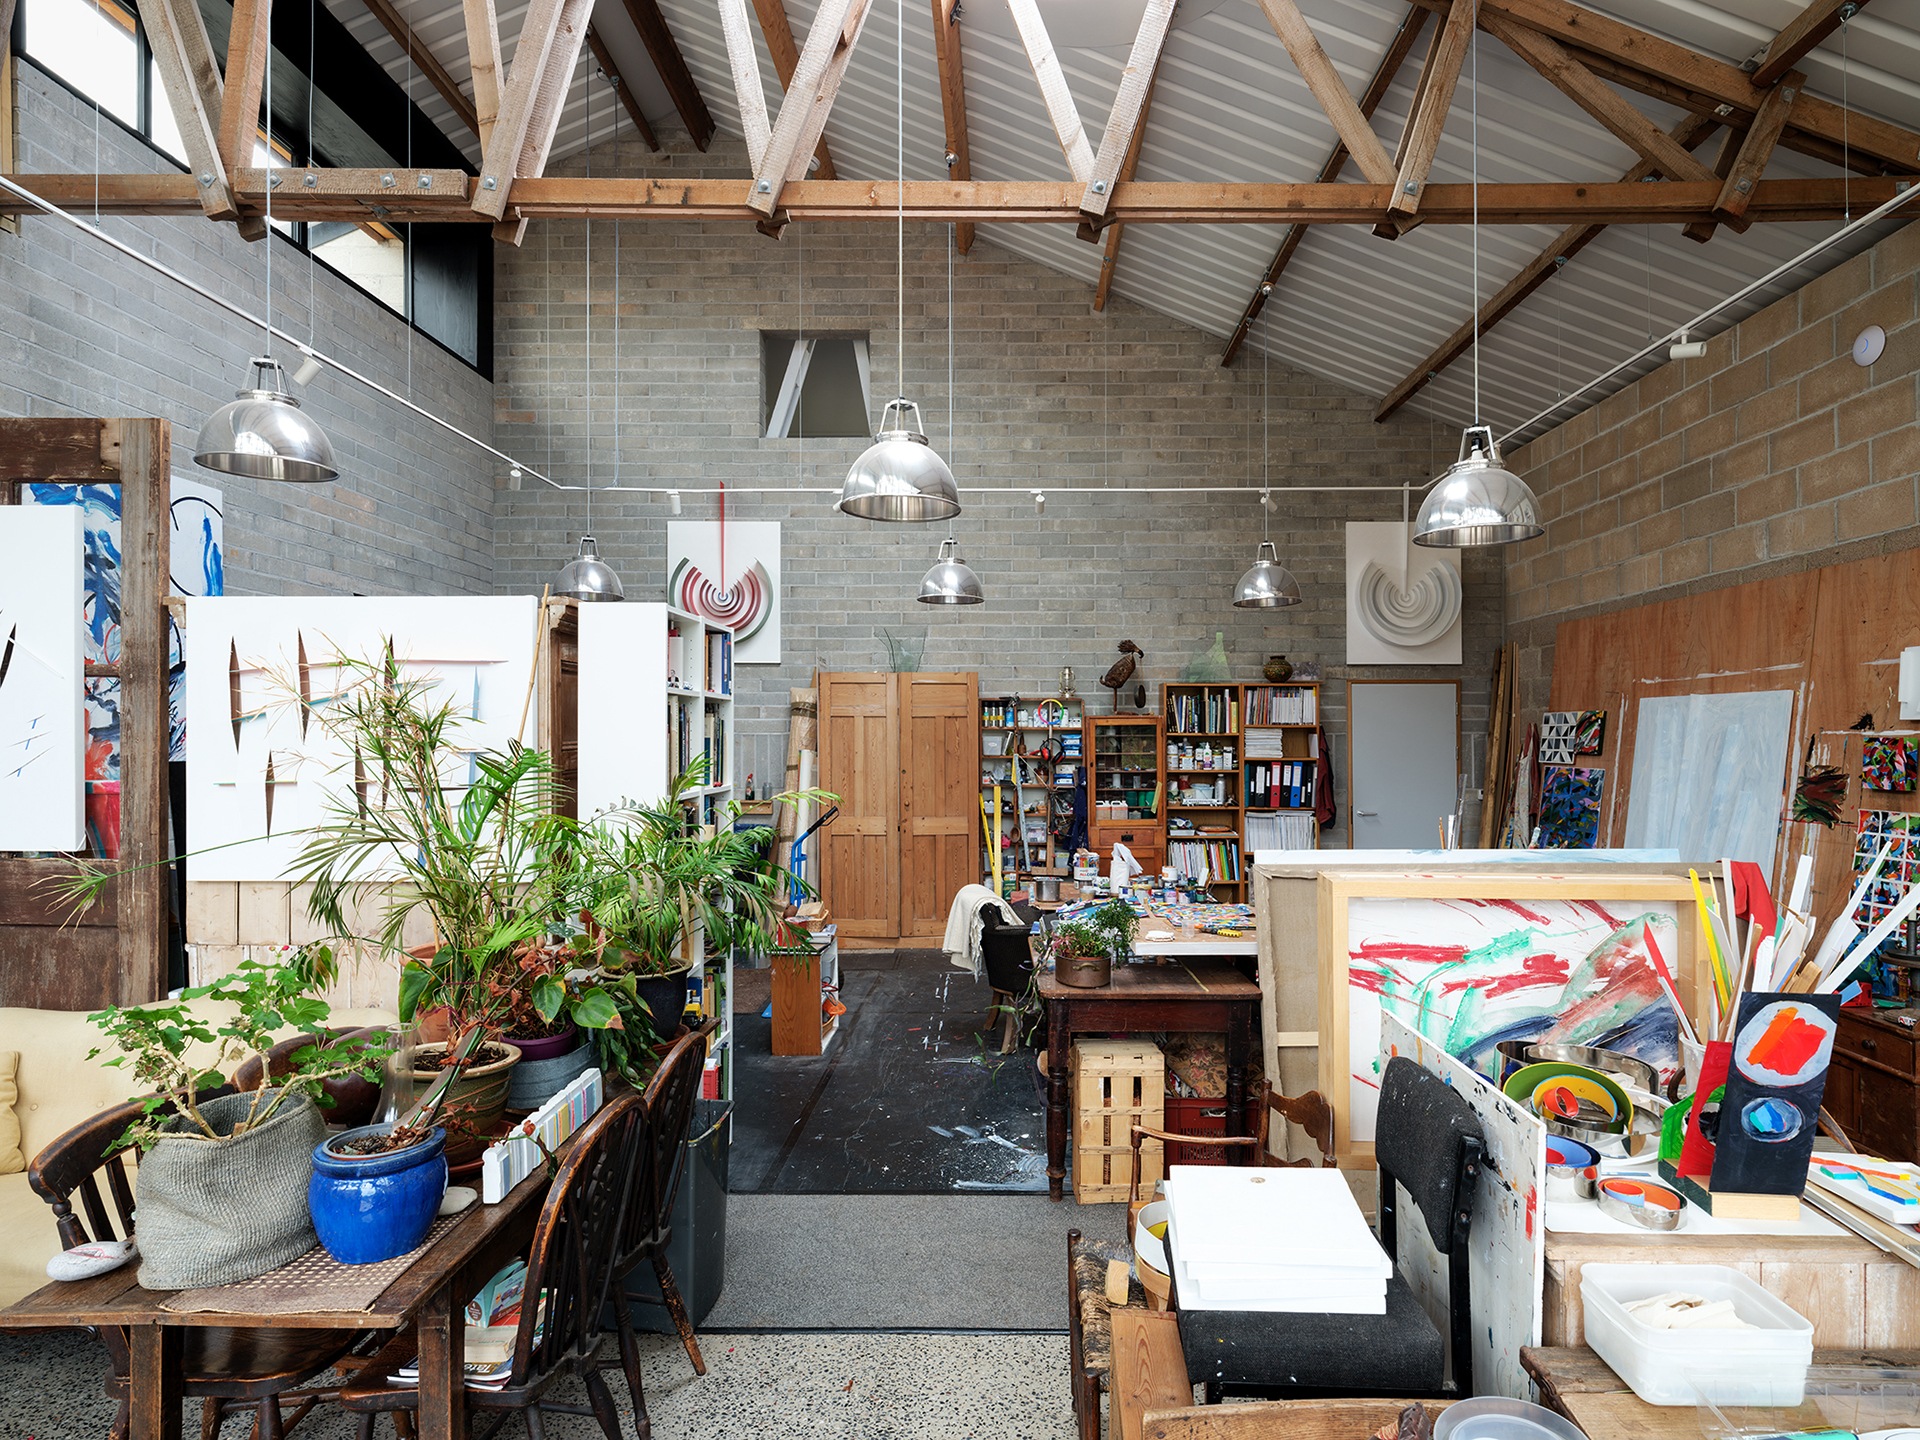 Artist's studio in Cowshed - House of the Year shortlisted home 2023